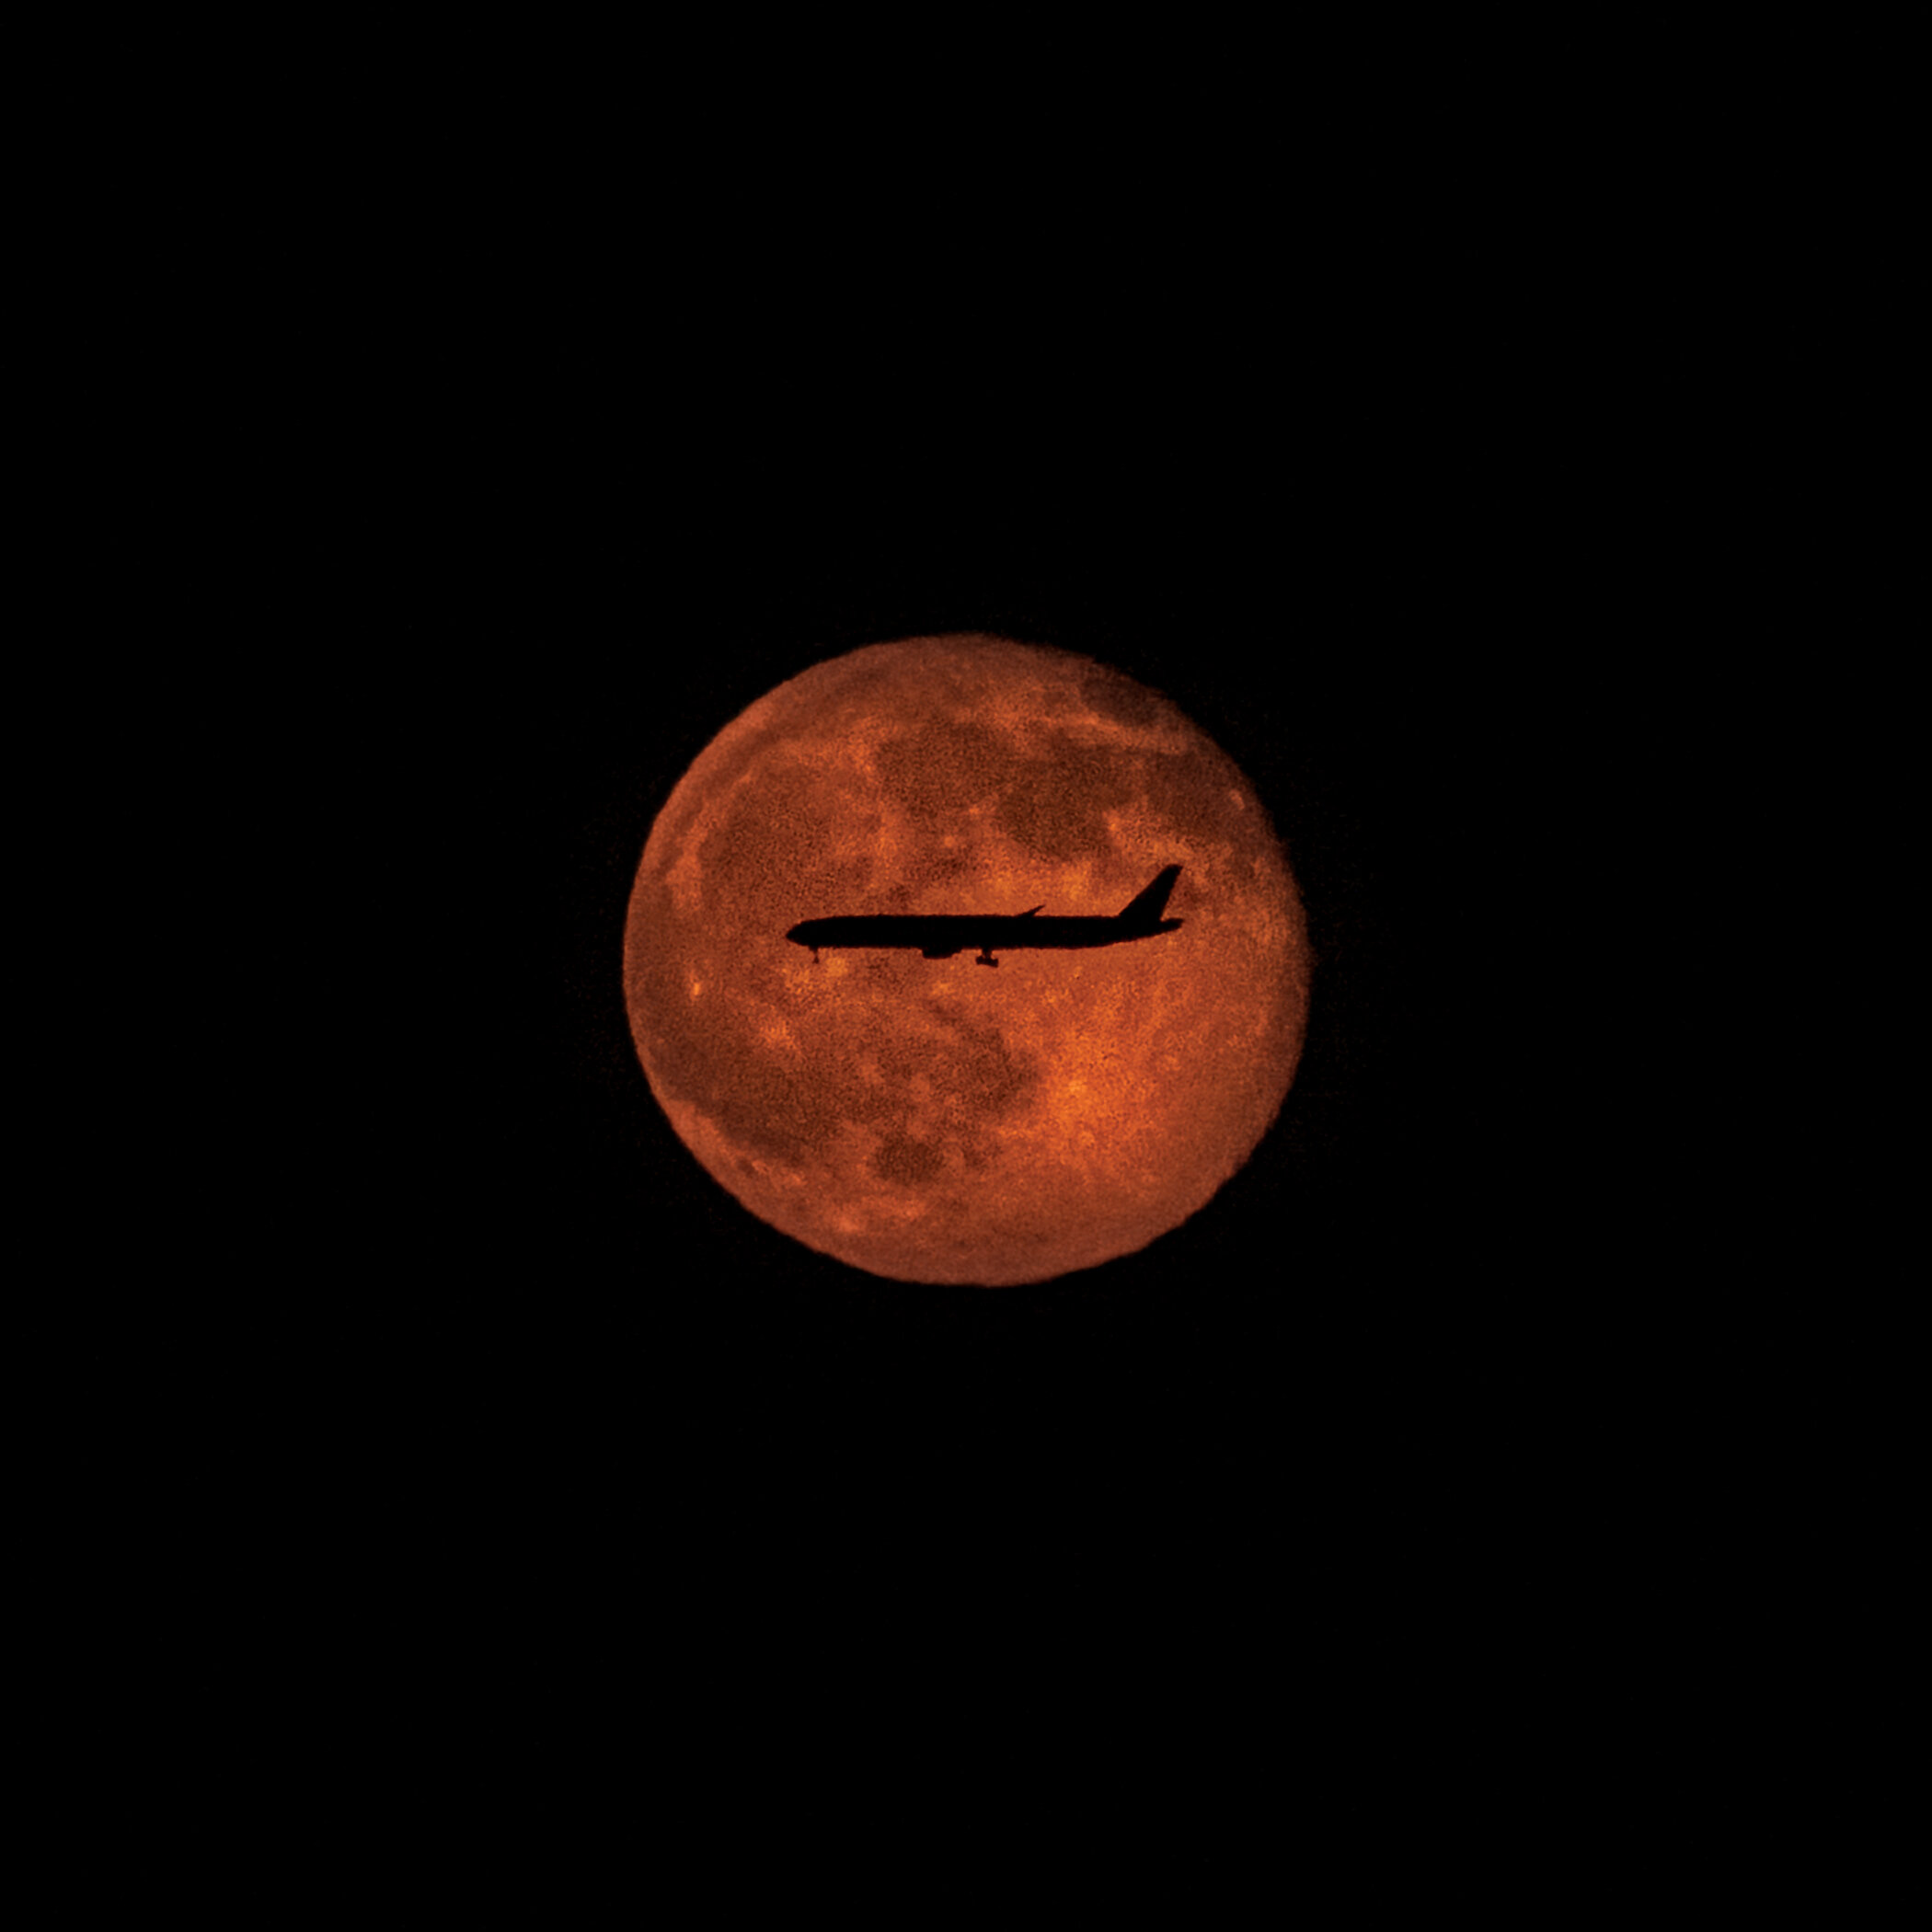  Mike Shane   Full Moon with Airplane, 2017   Archival pigment print, 2017, 7” x 7”  